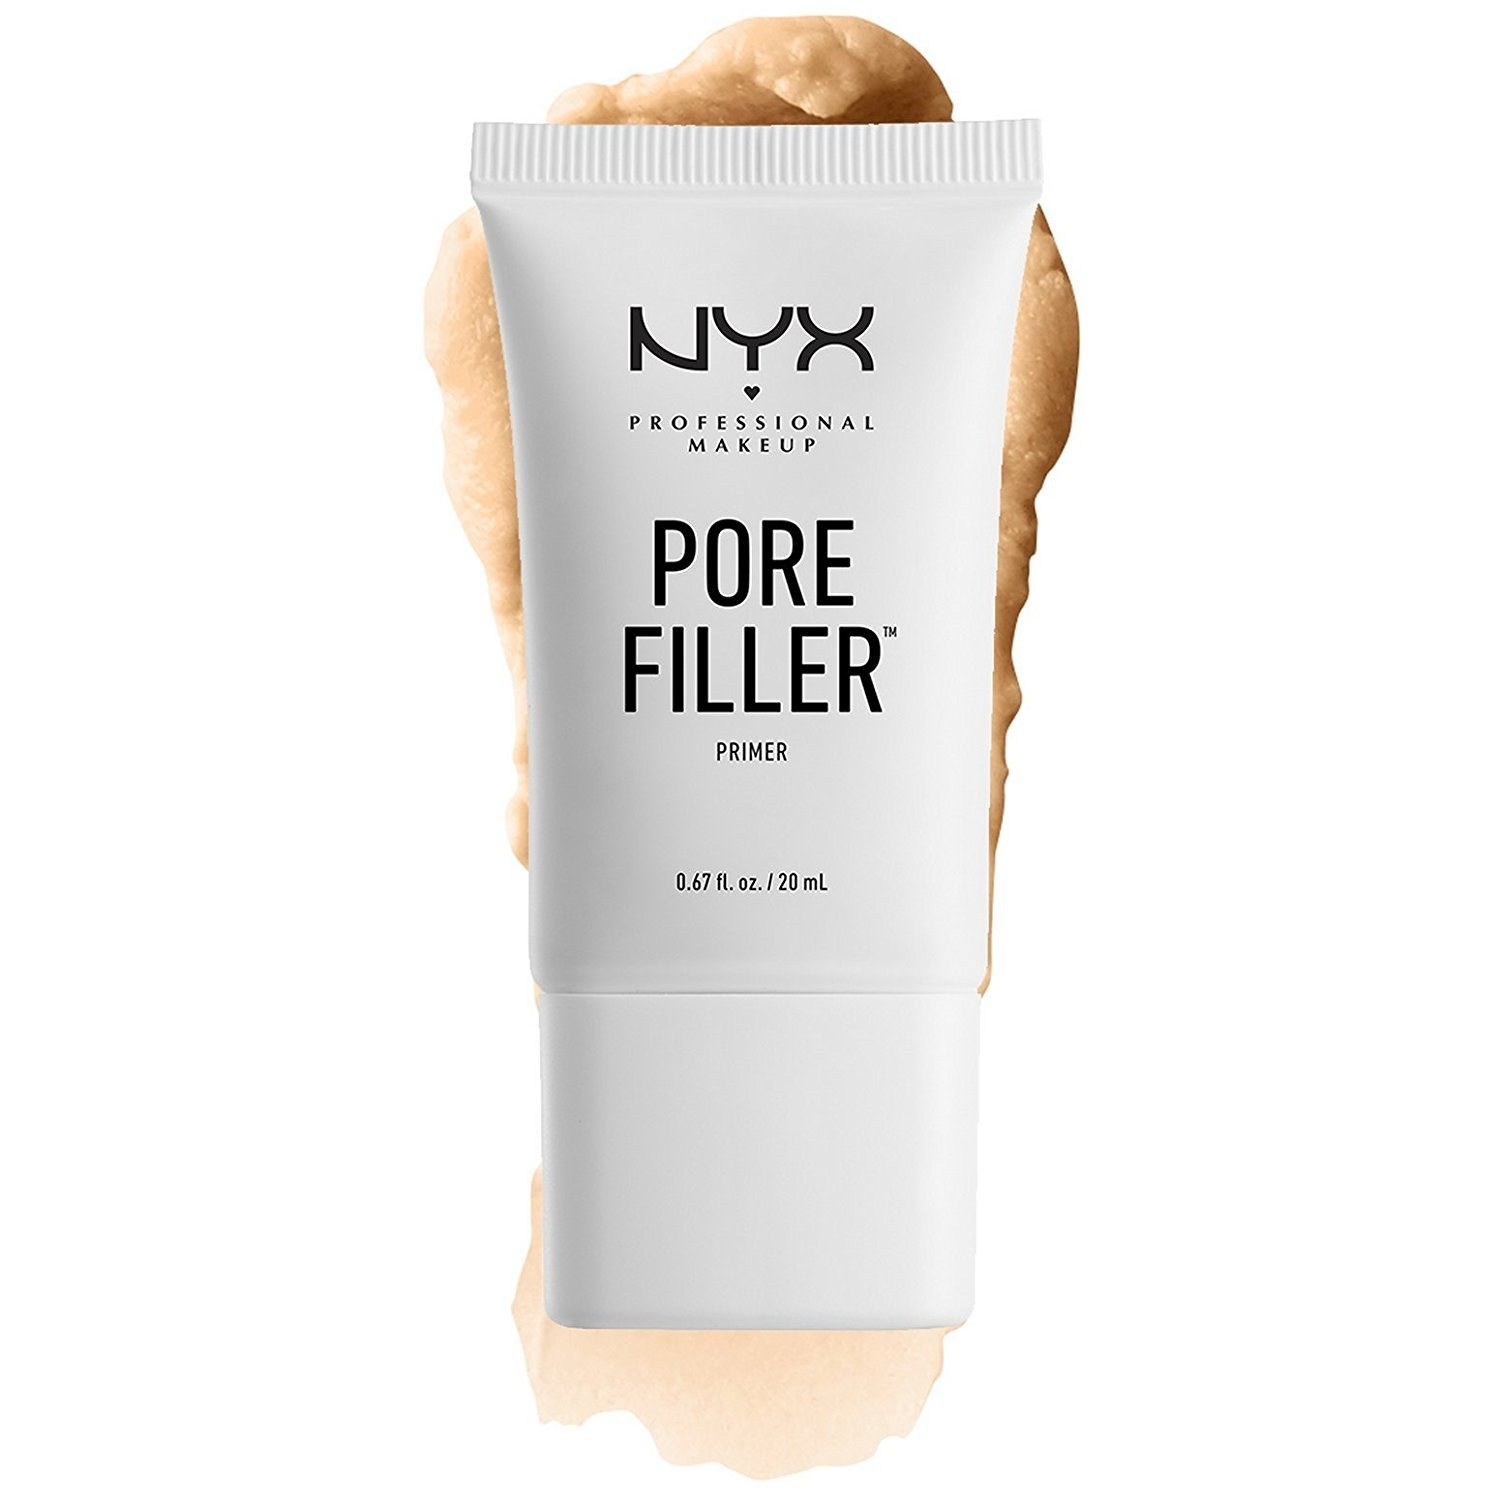 The bottle of NYX pore-filler with a swatch of the product behind